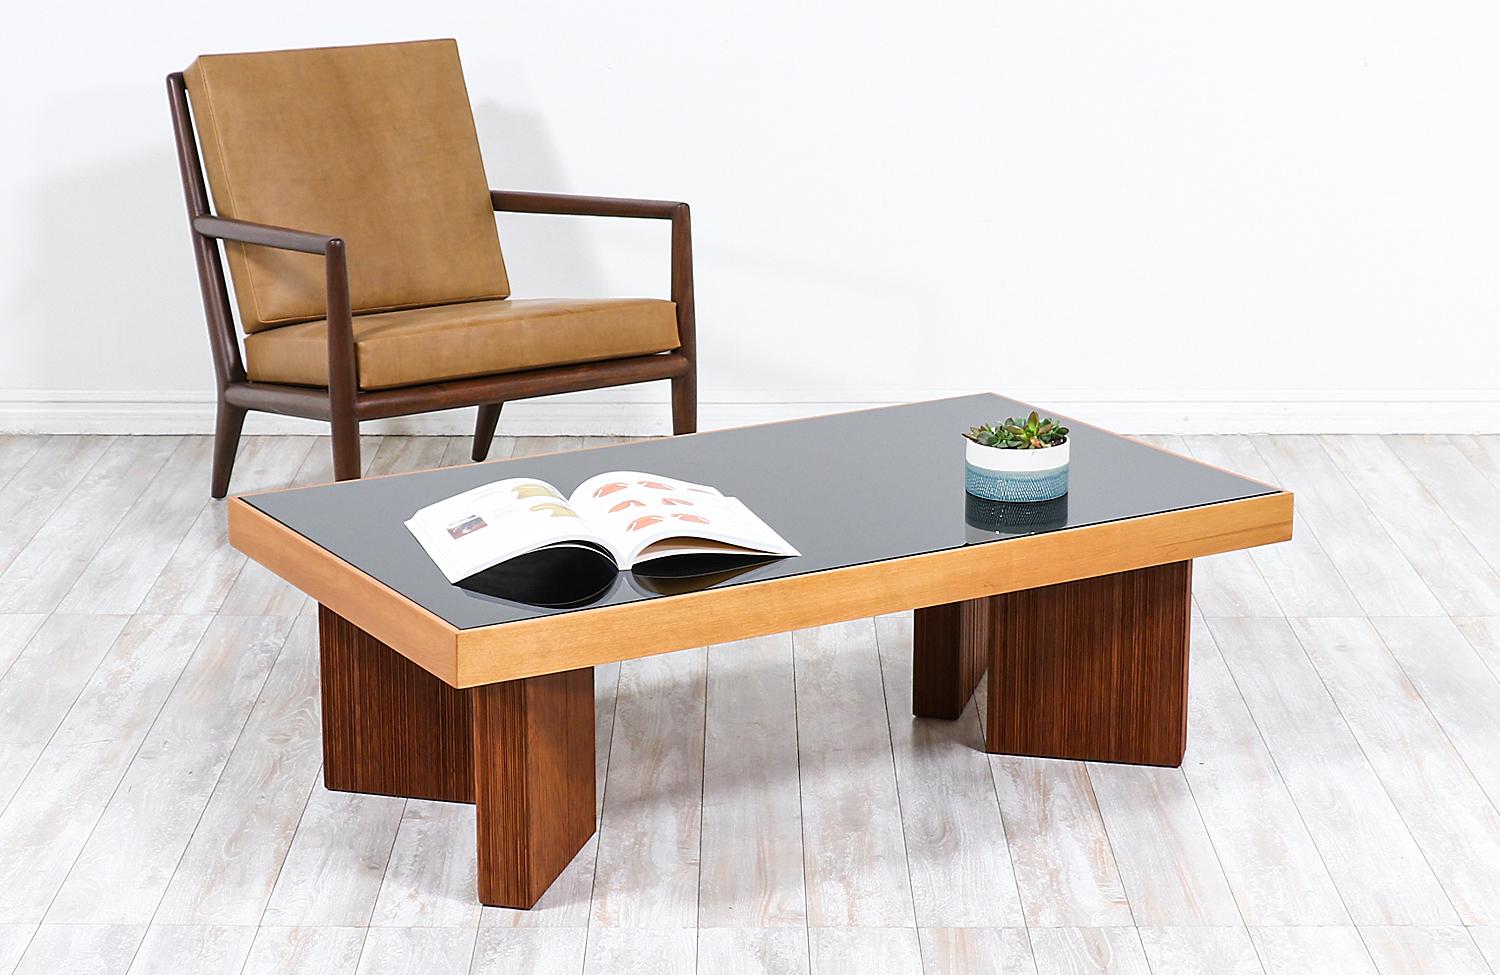 American Mid-Century Modern Coffee Table with Smoke Glass Top